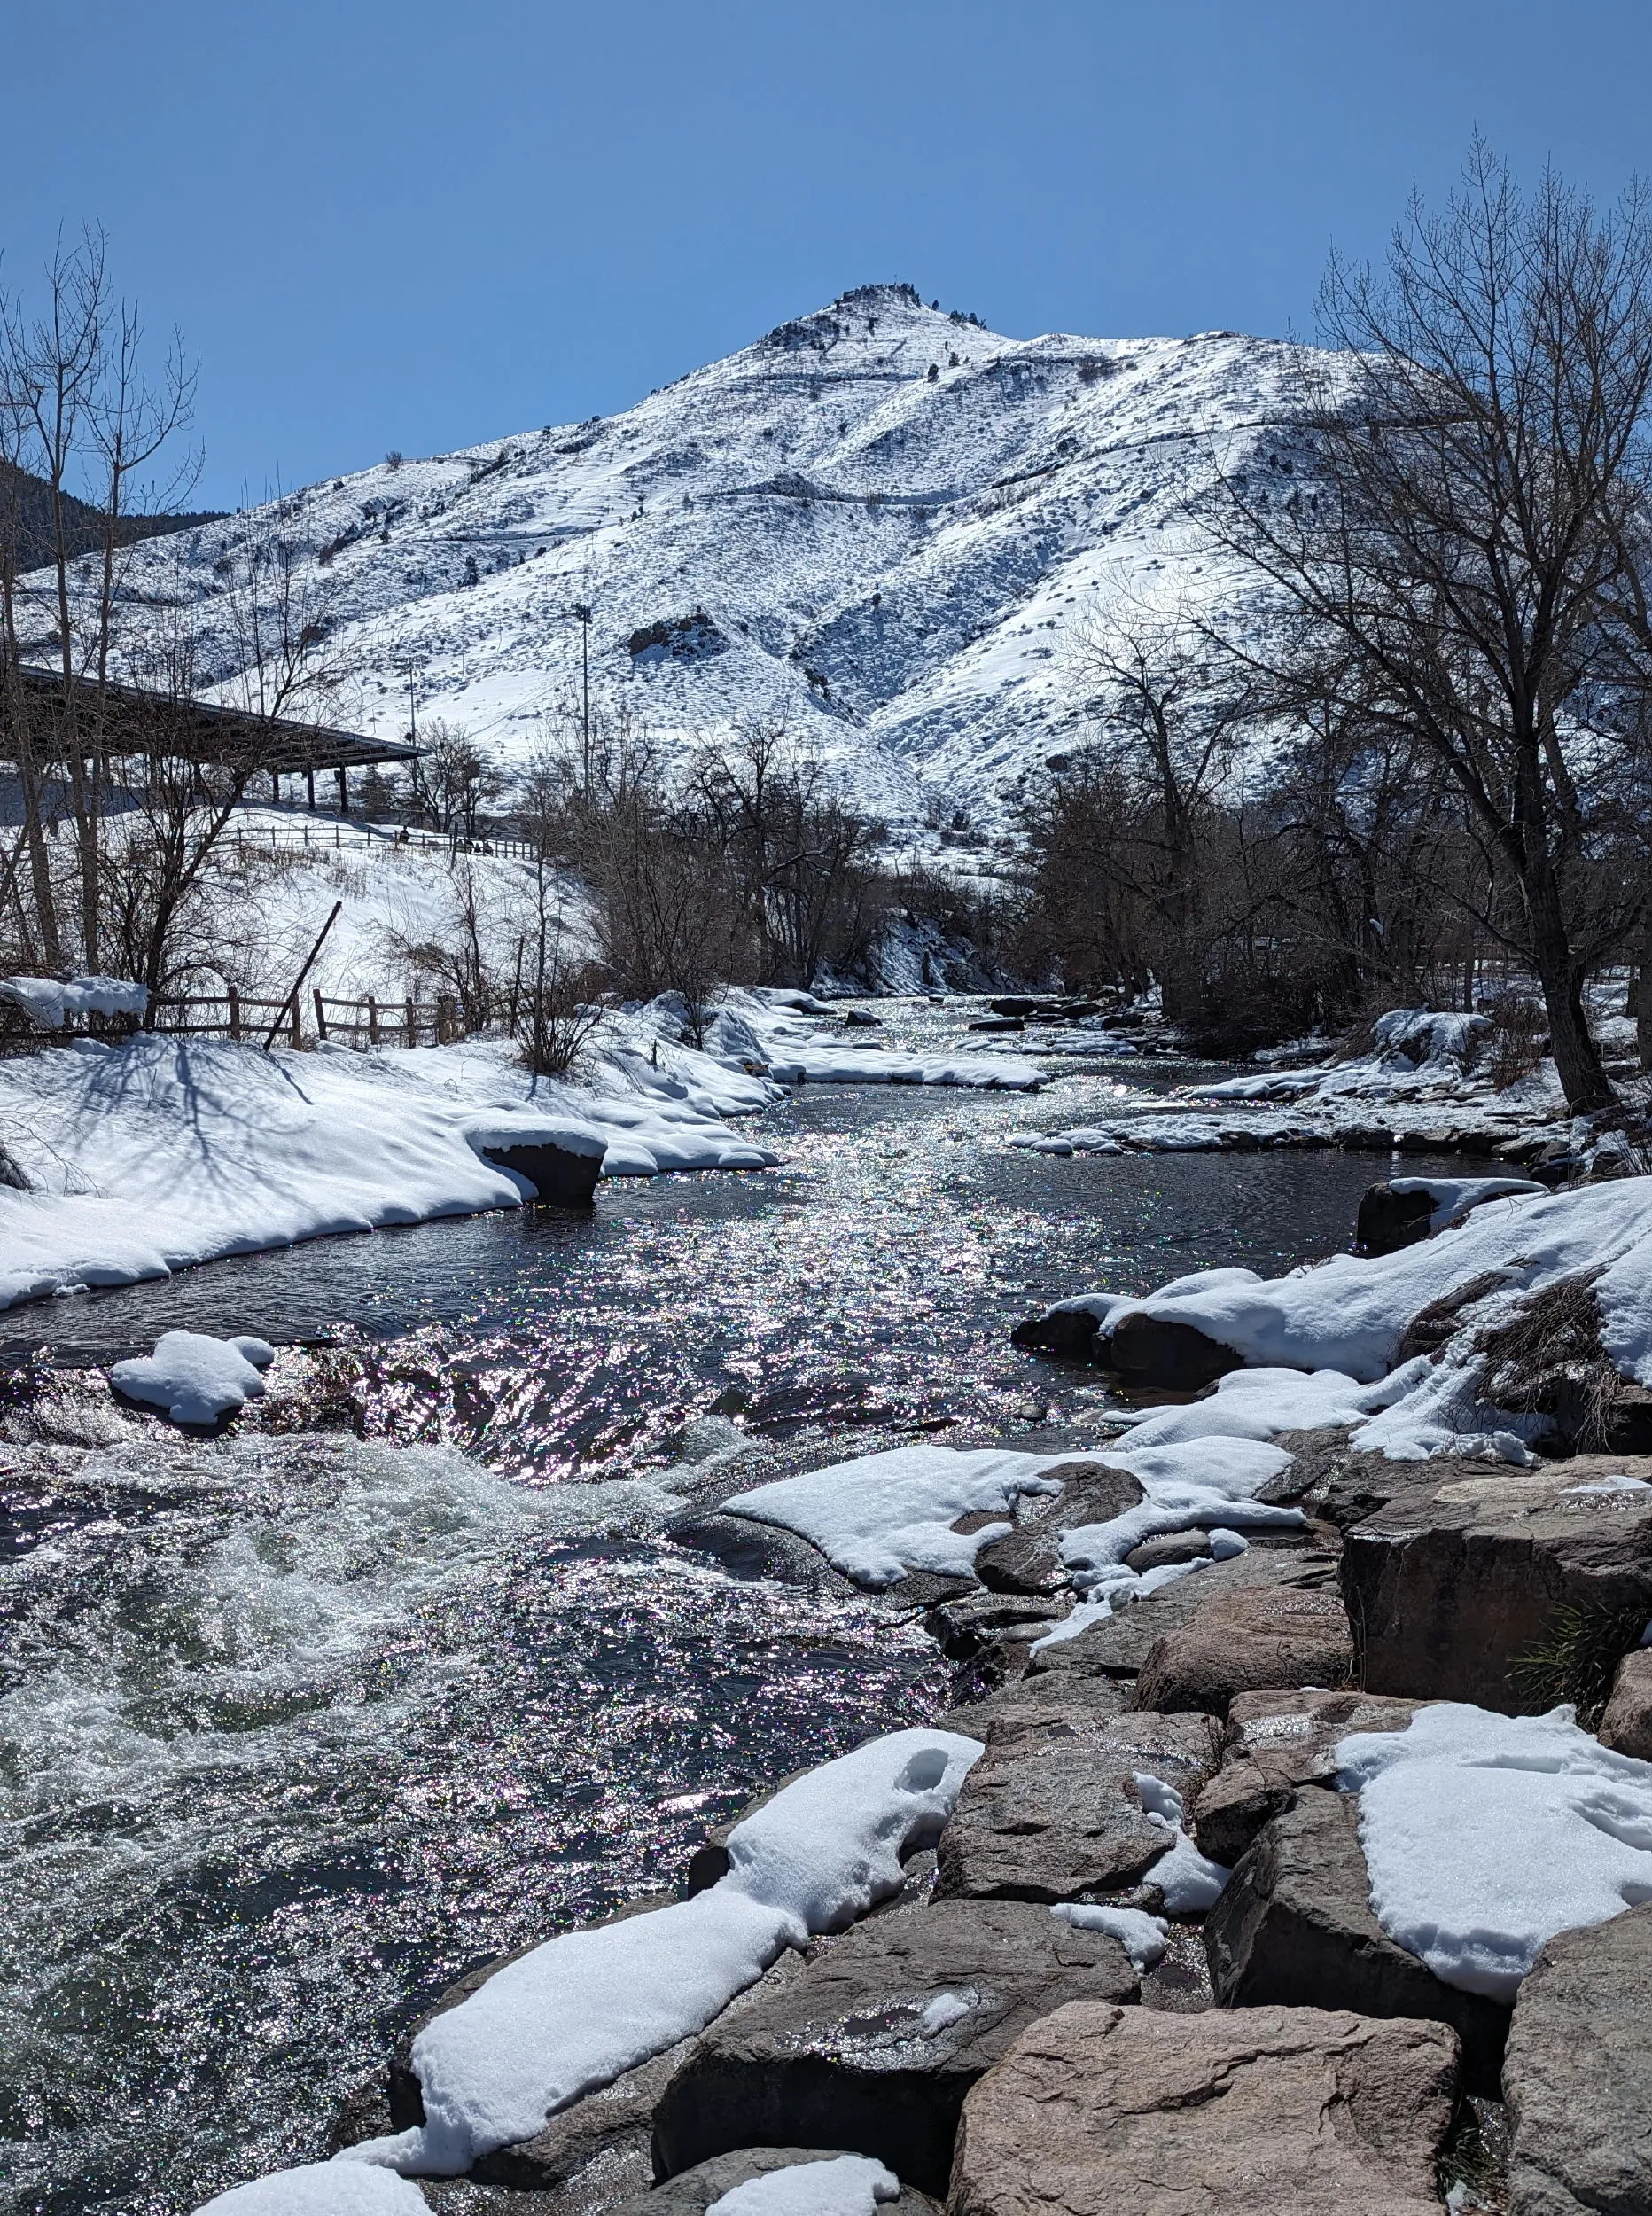 Winter view of Mt. Zion with Clear Creek in the foreground, snow on either side.